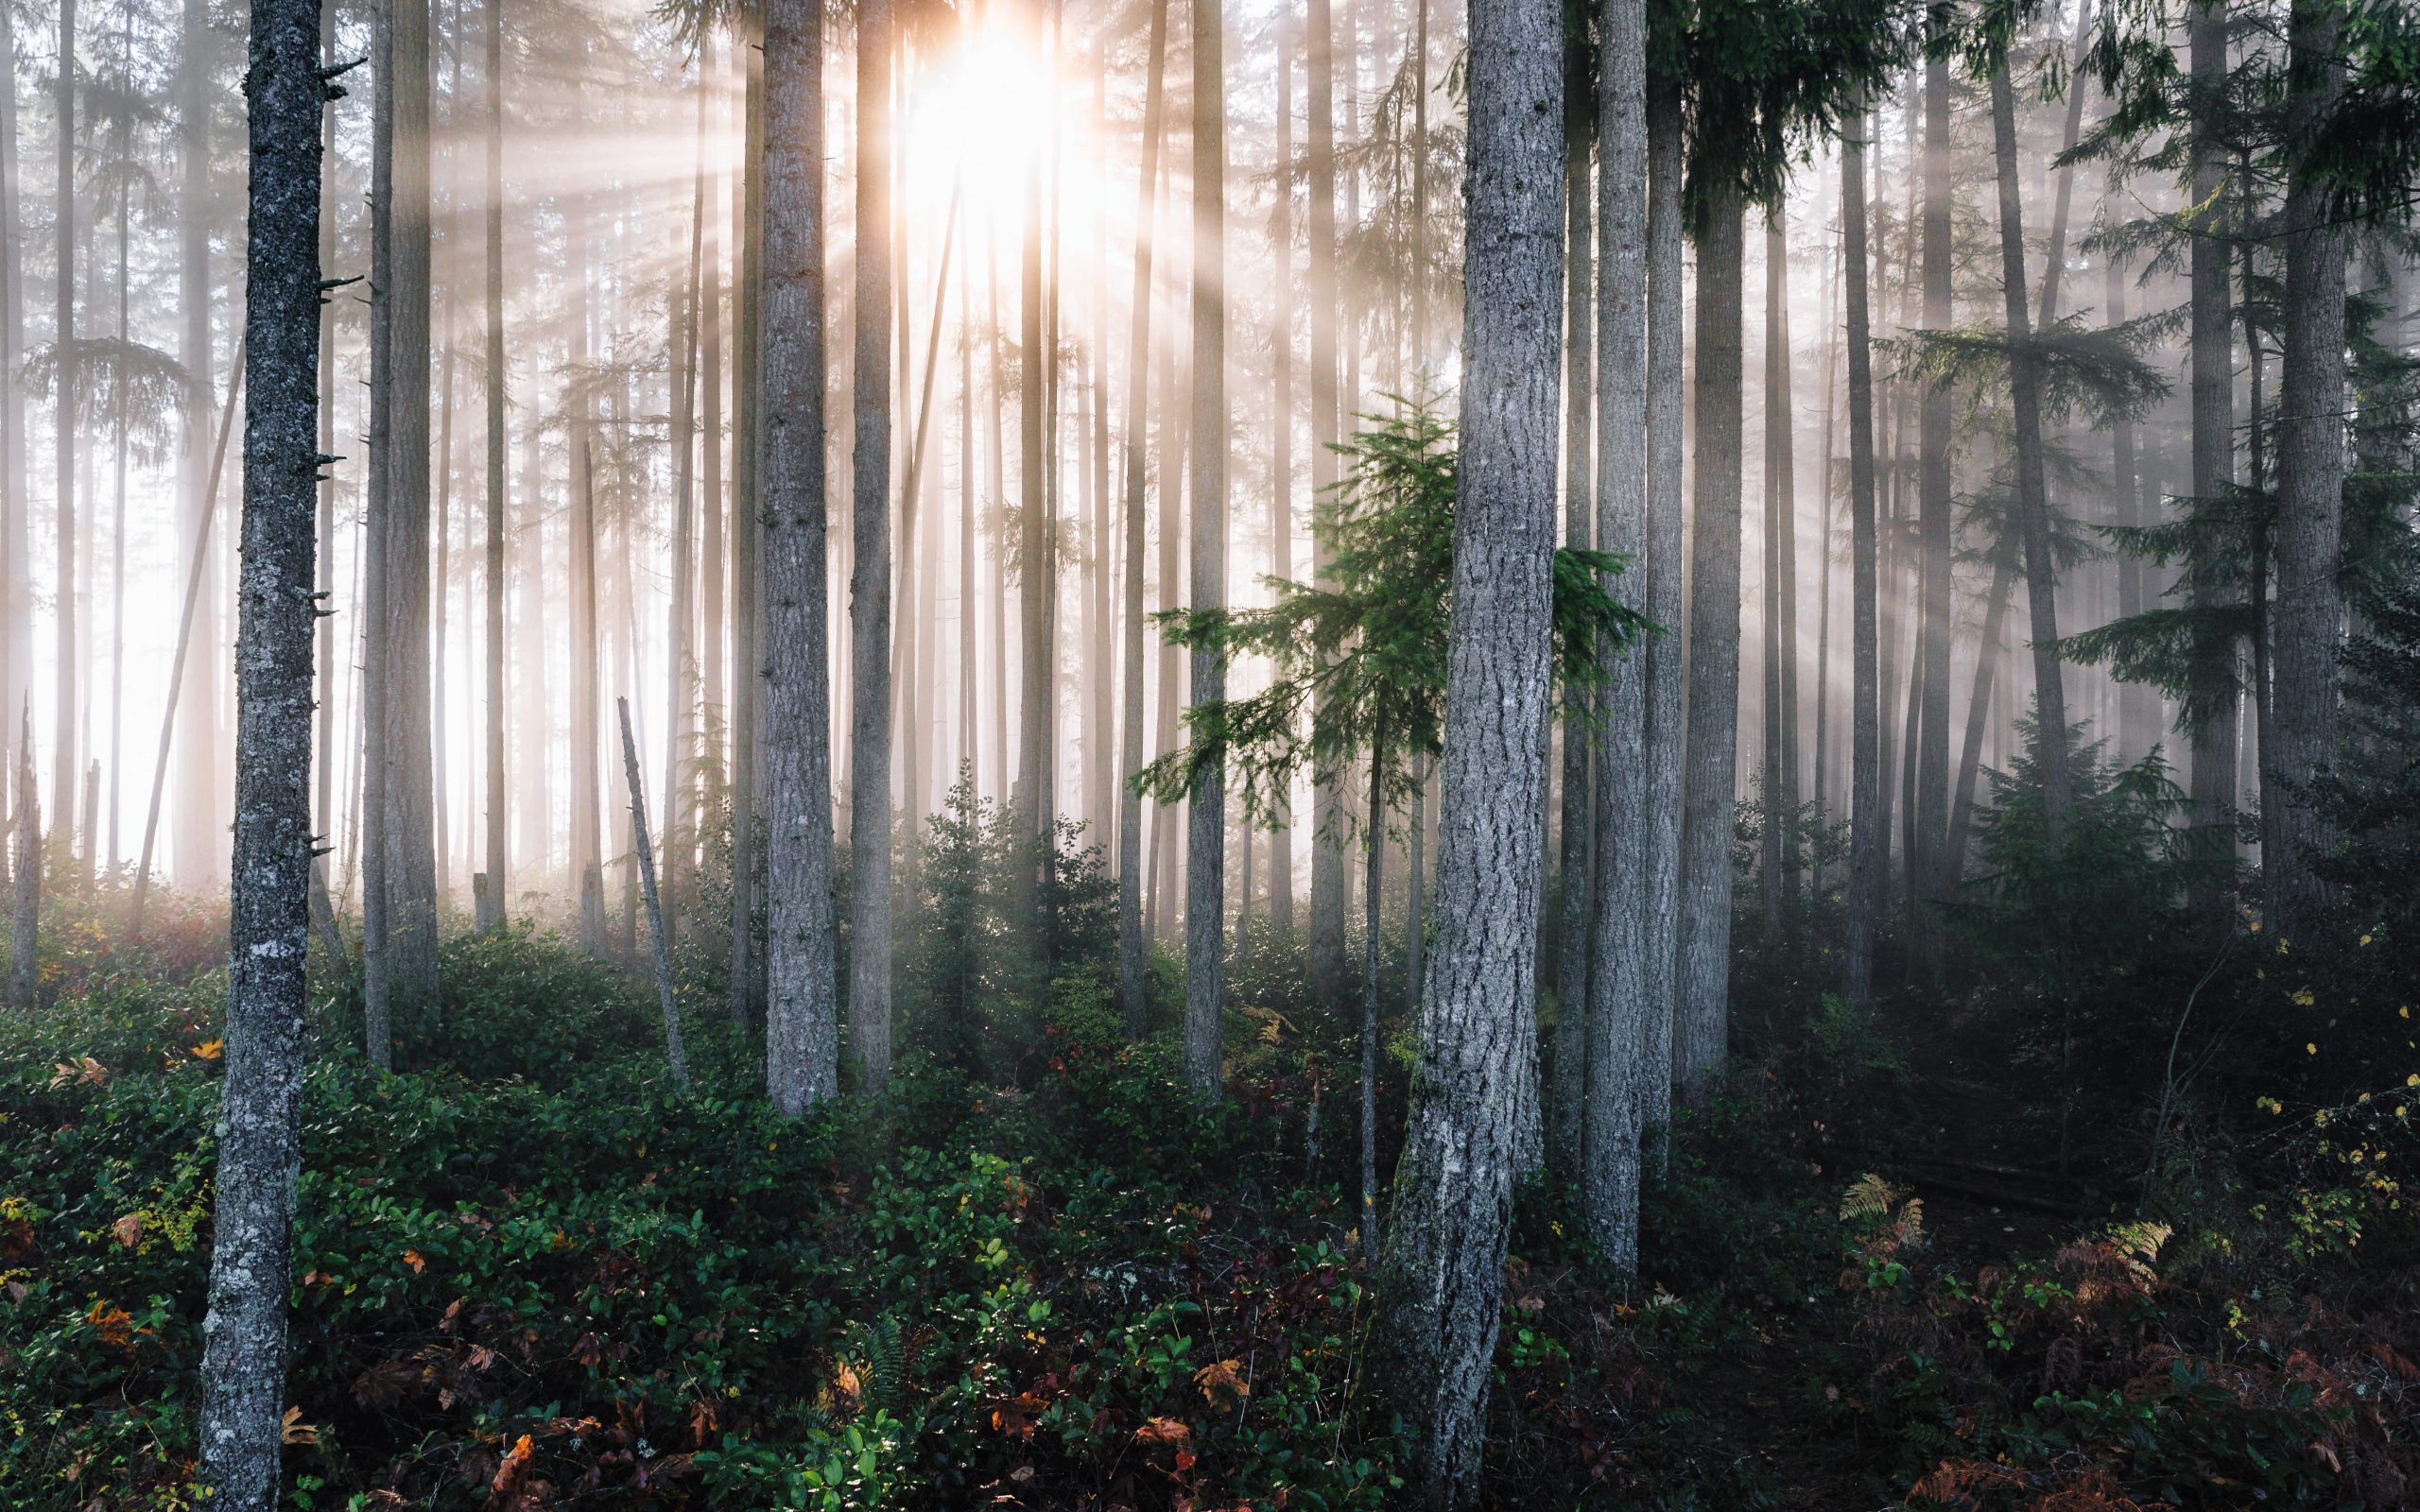 A photo of a peaceful pine forest at sunrise. The forest floor is covered in green bushes and the rising sun is shining in between many tall, straight, and symmetrical trees.